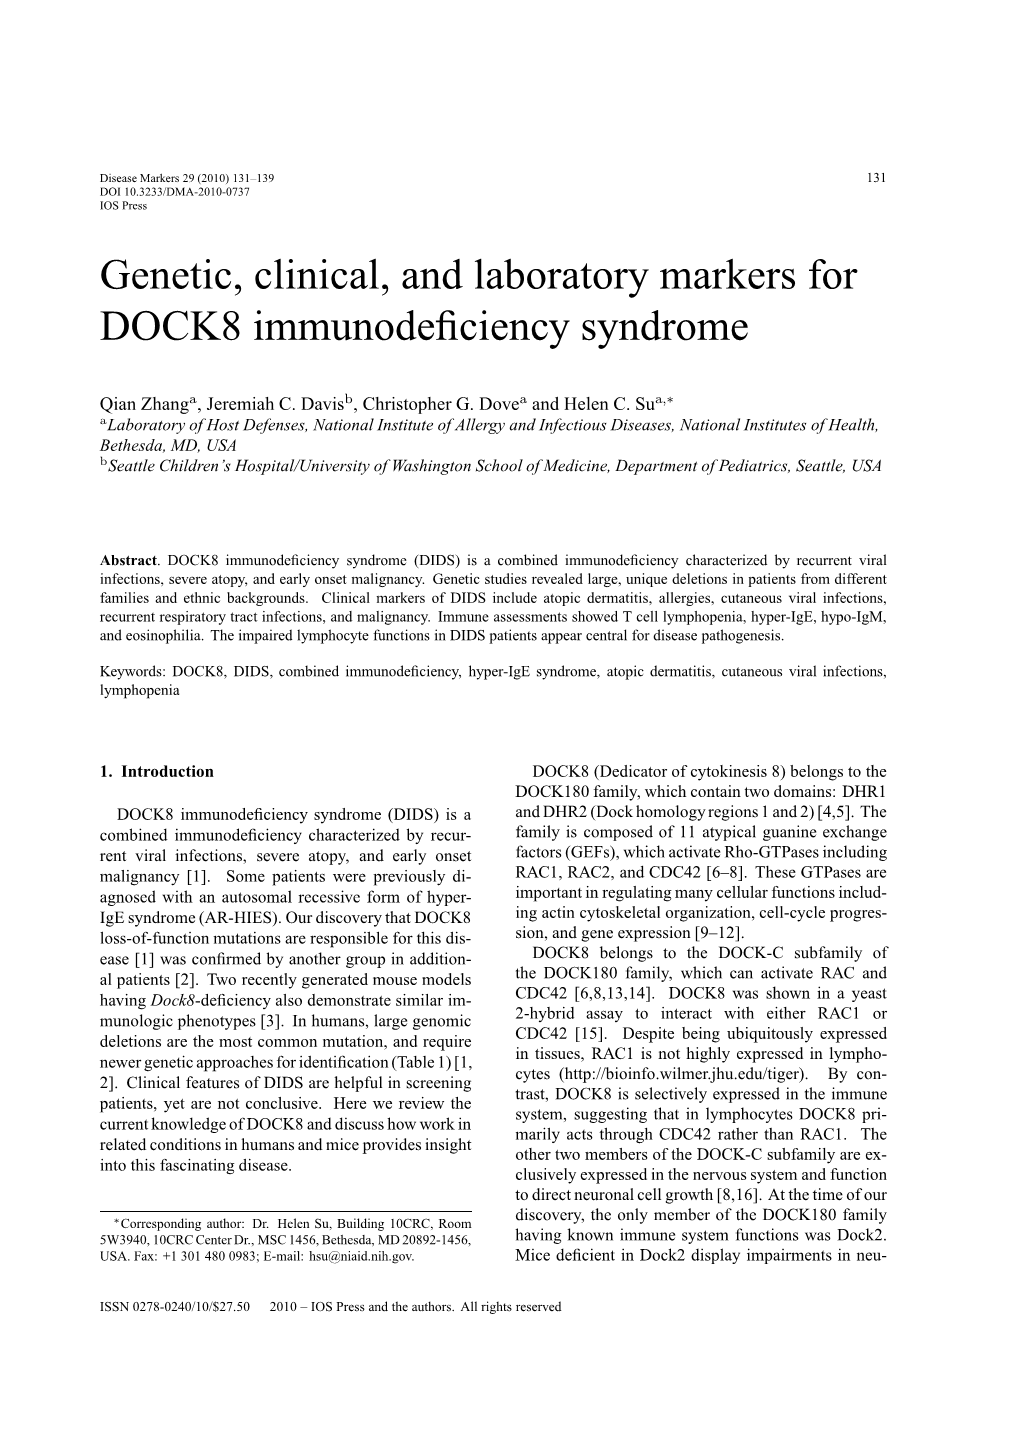 Genetic, Clinical, and Laboratory Markers for DOCK8 Immunodeﬁciency Syndrome